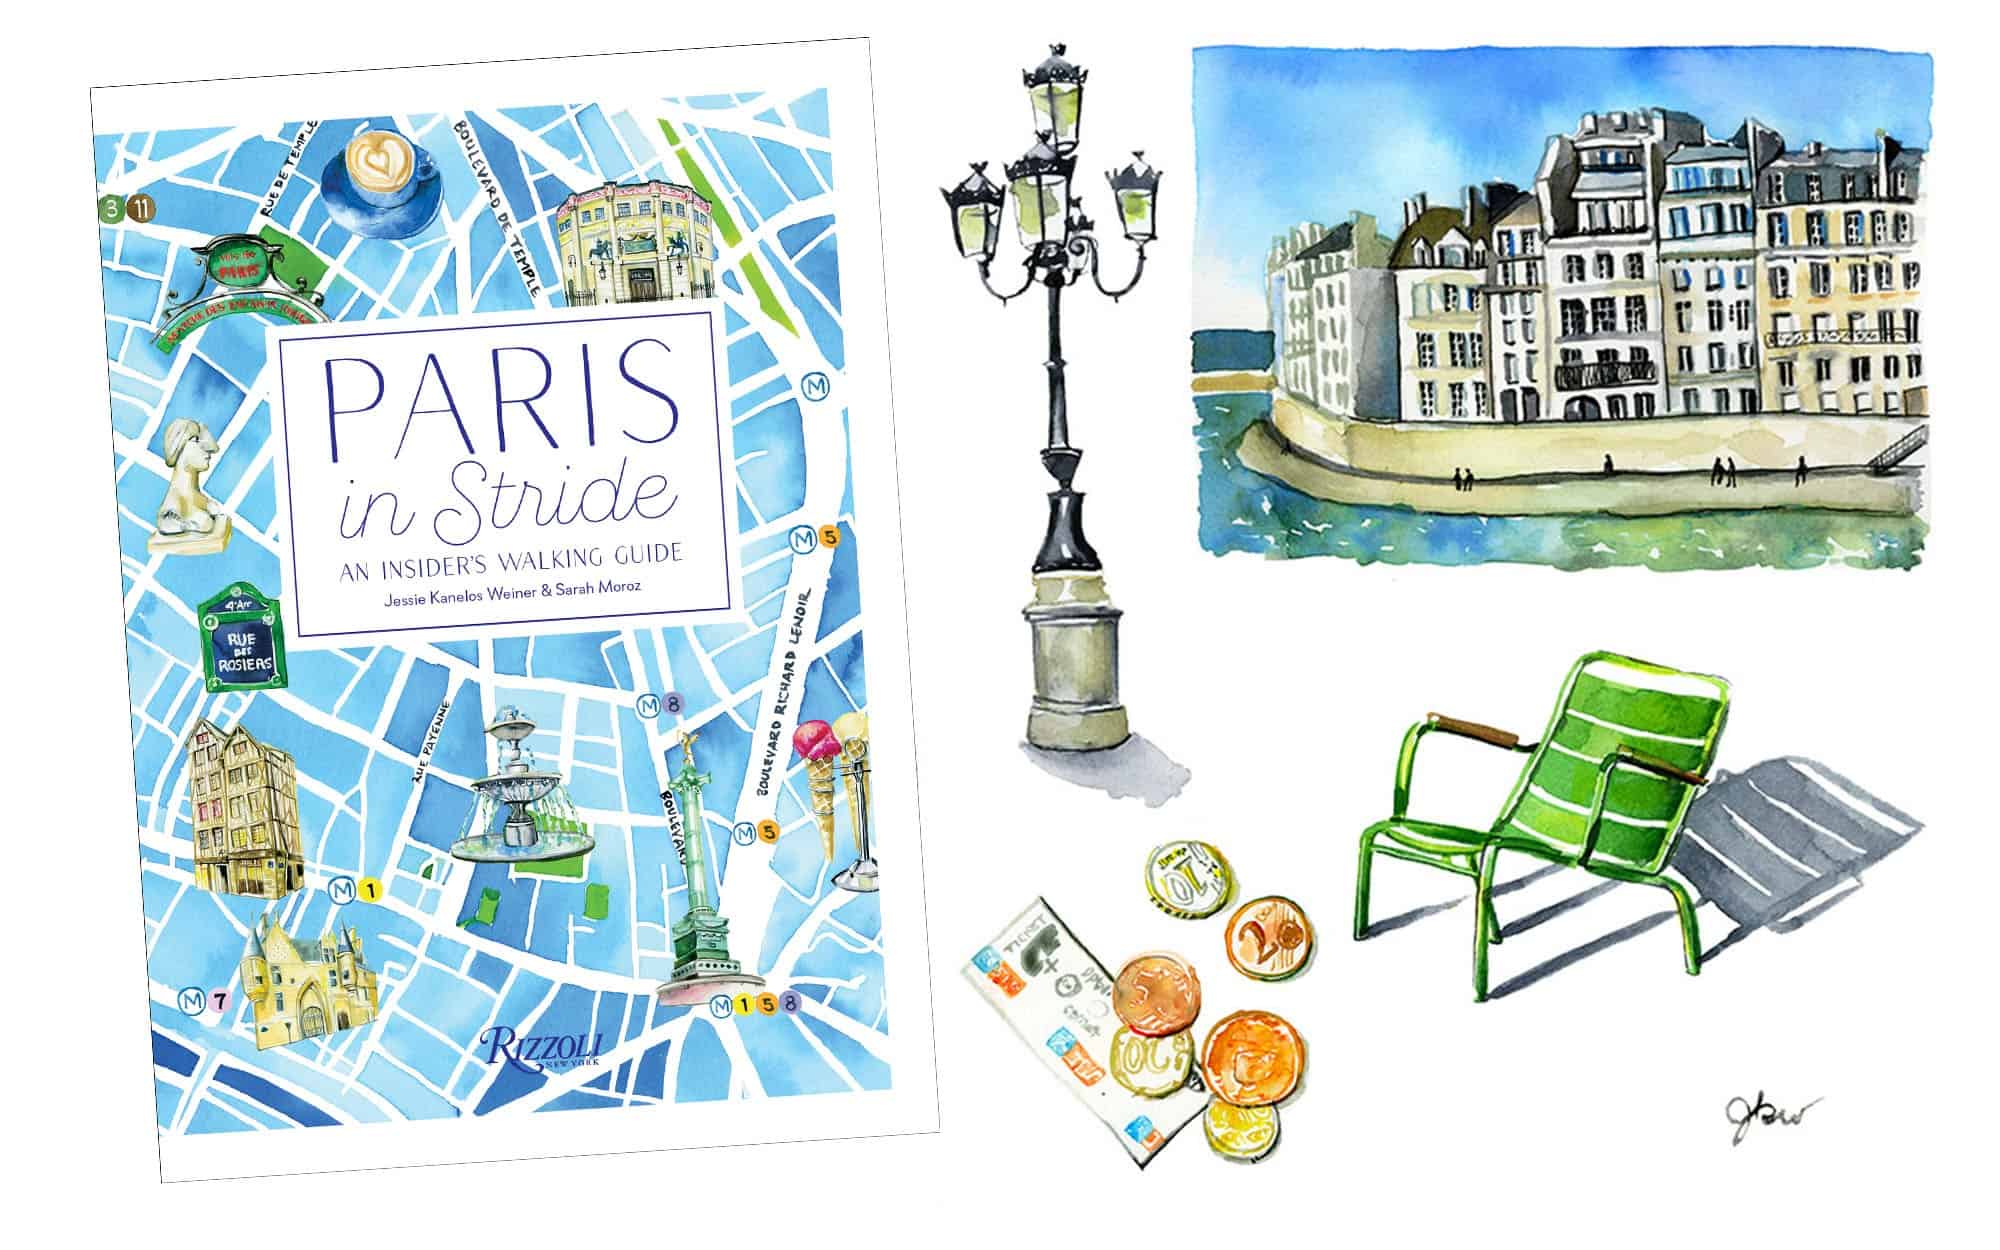 One of the best illustrated Paris guide books by artist Jessie Kanelos Weiner. The cover (left), and illustrations of the River Seine (left).